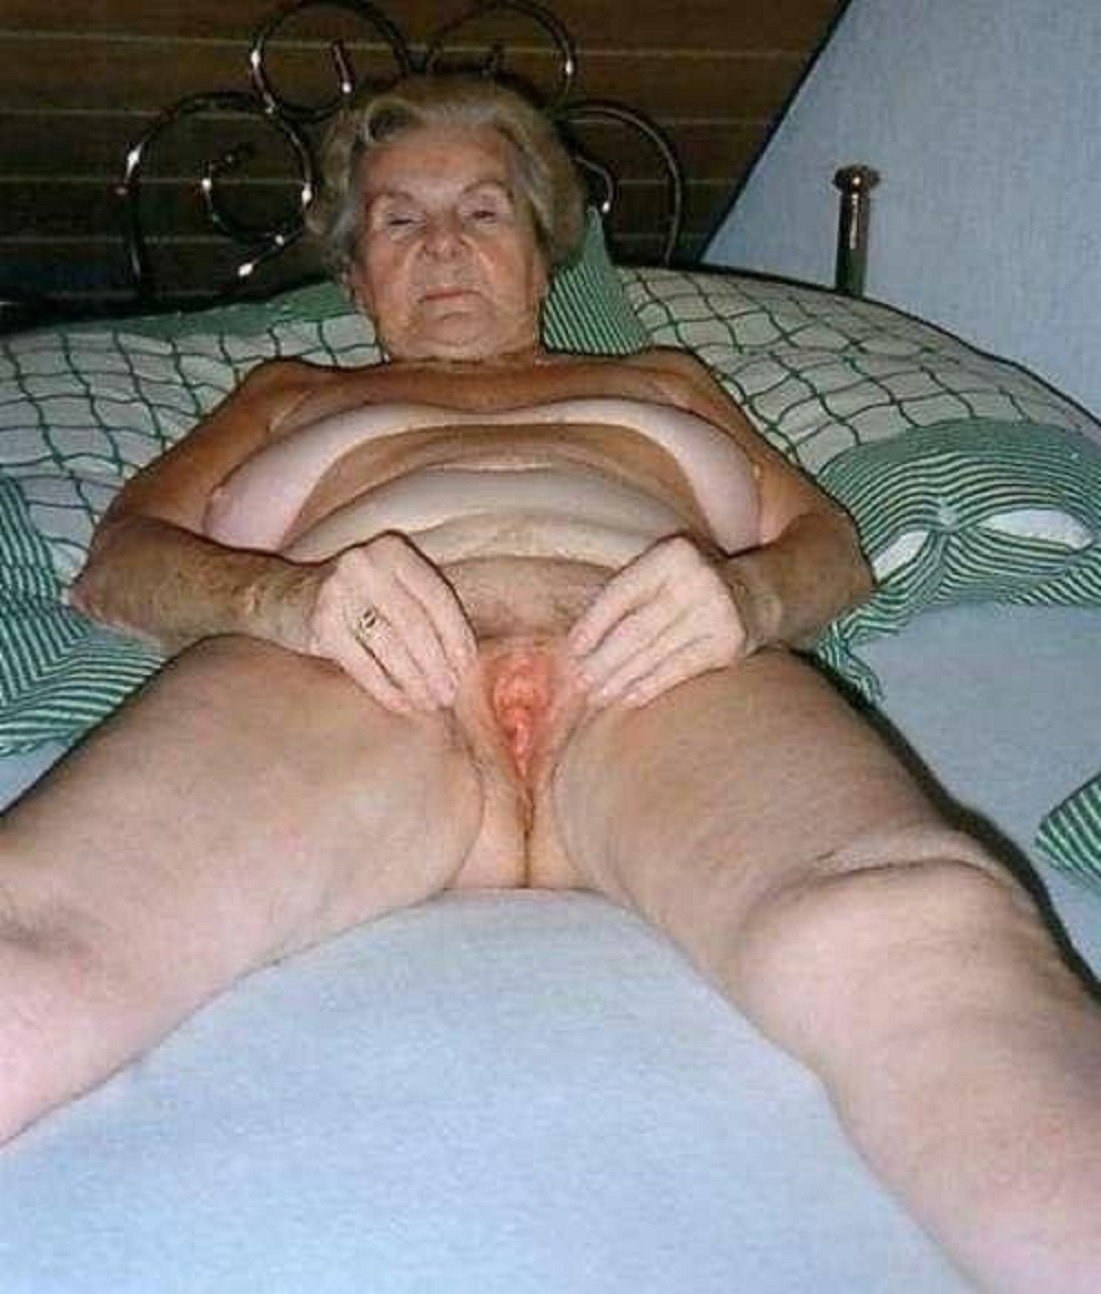 Year Old Nude Grannies And Granny Years Old Nude Women Xxx